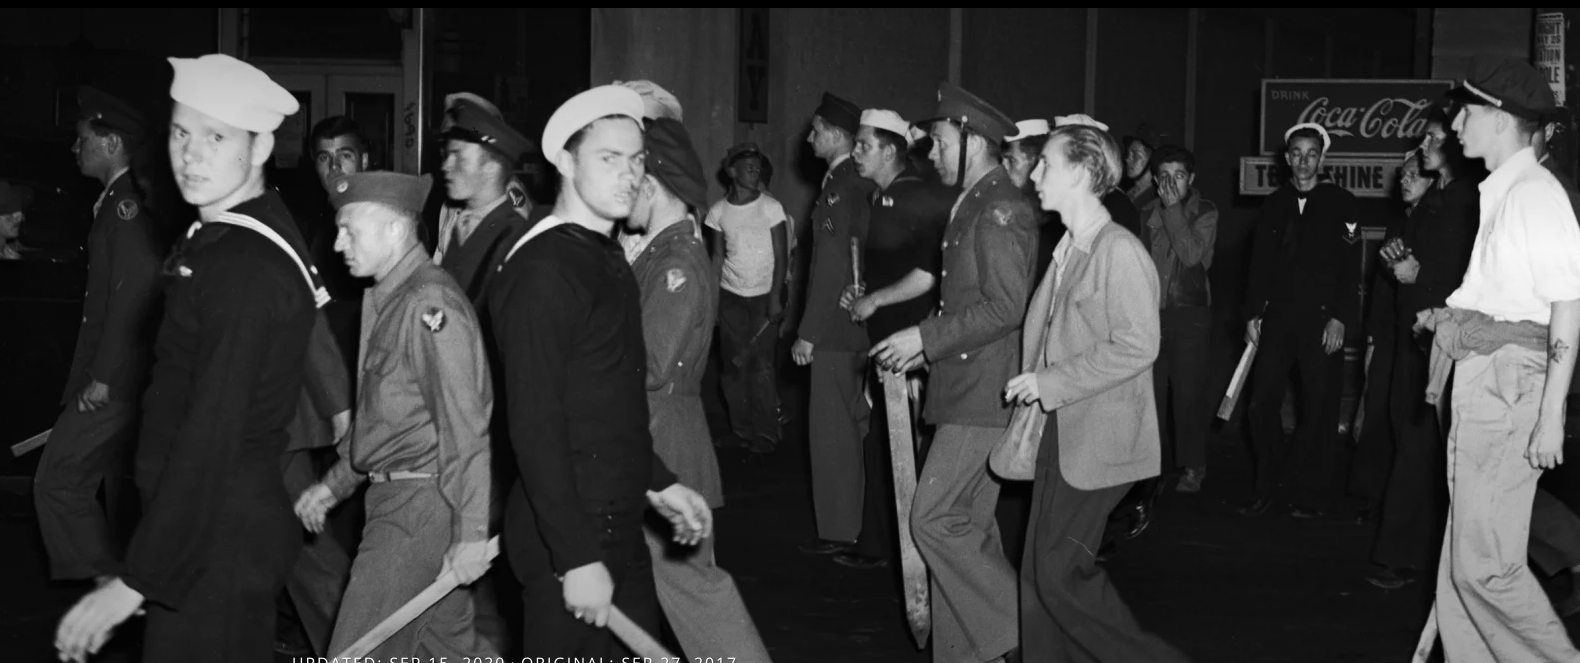 Backstory: ‘The Zoot Suit Riots’ (Los Angeles, 1943)